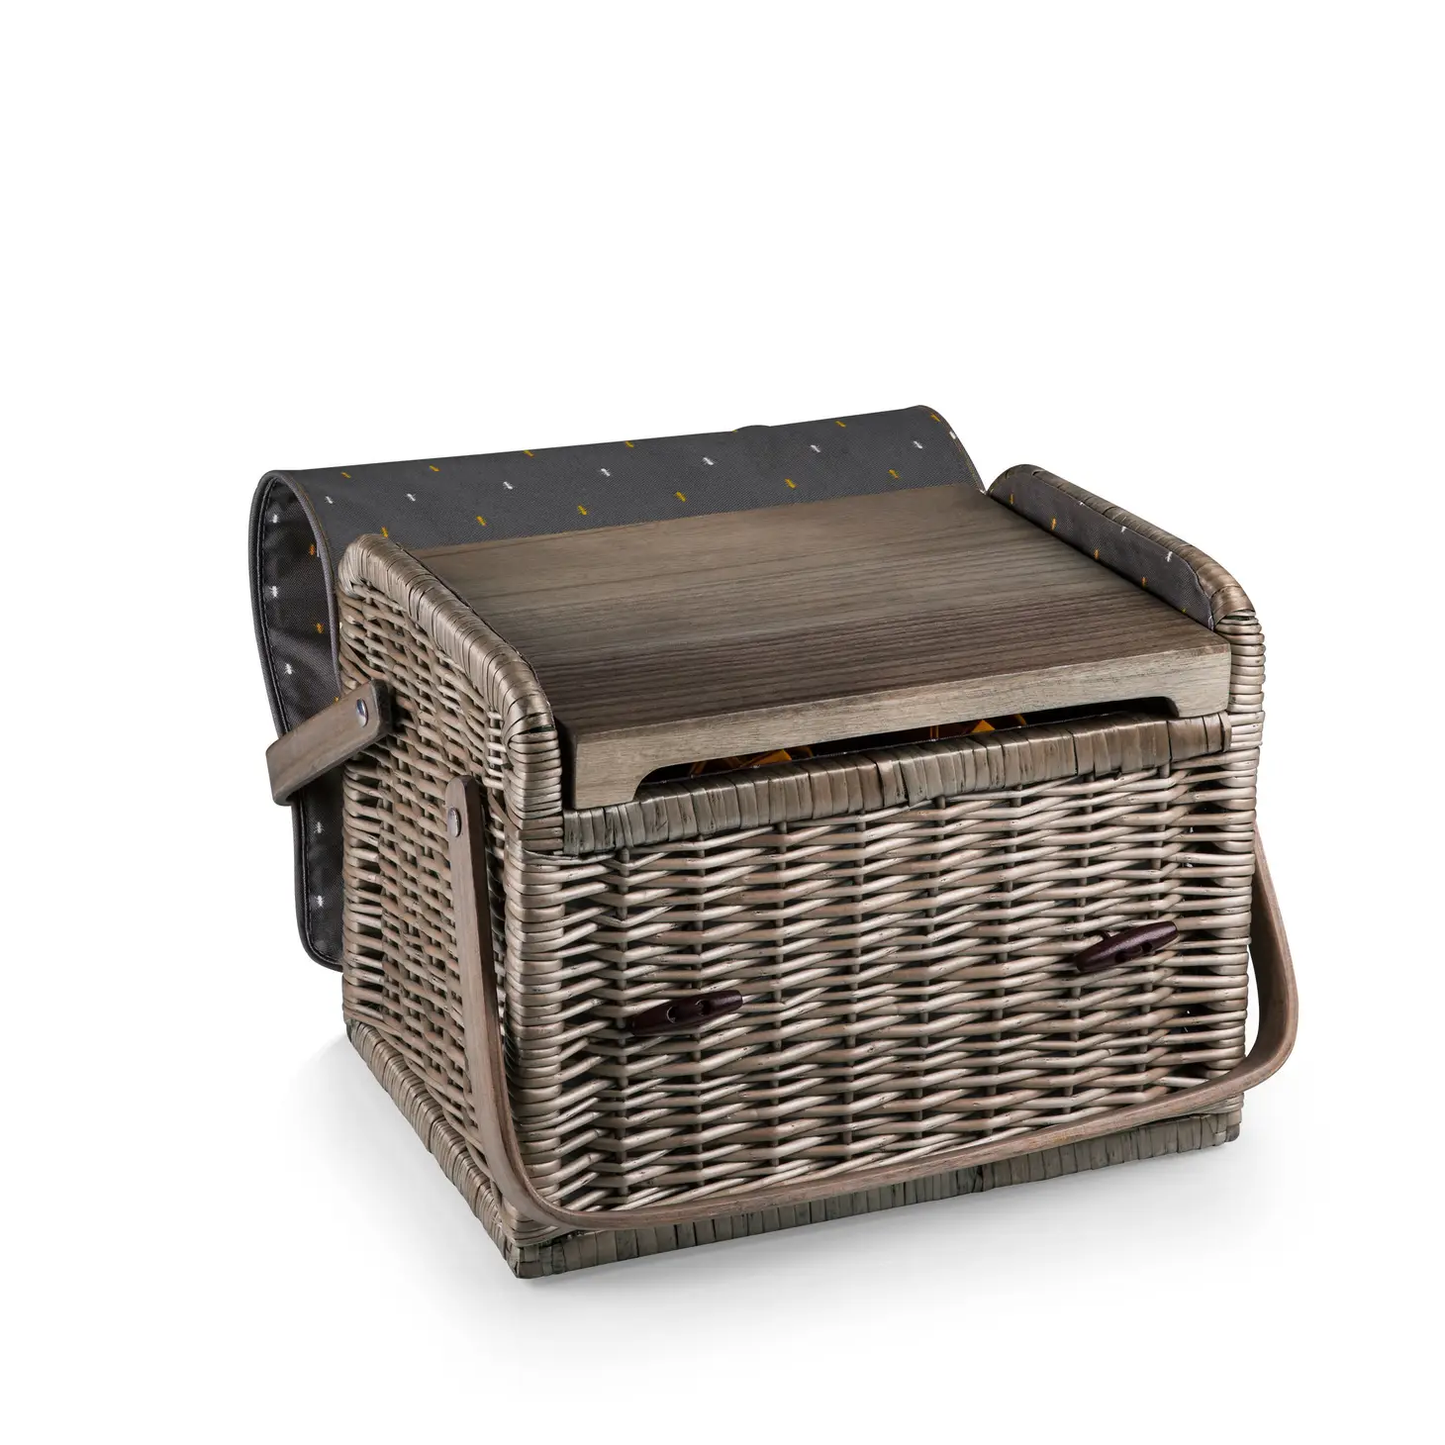 Kabrio Wine & Cheese Picnic Basket - Core staged 2